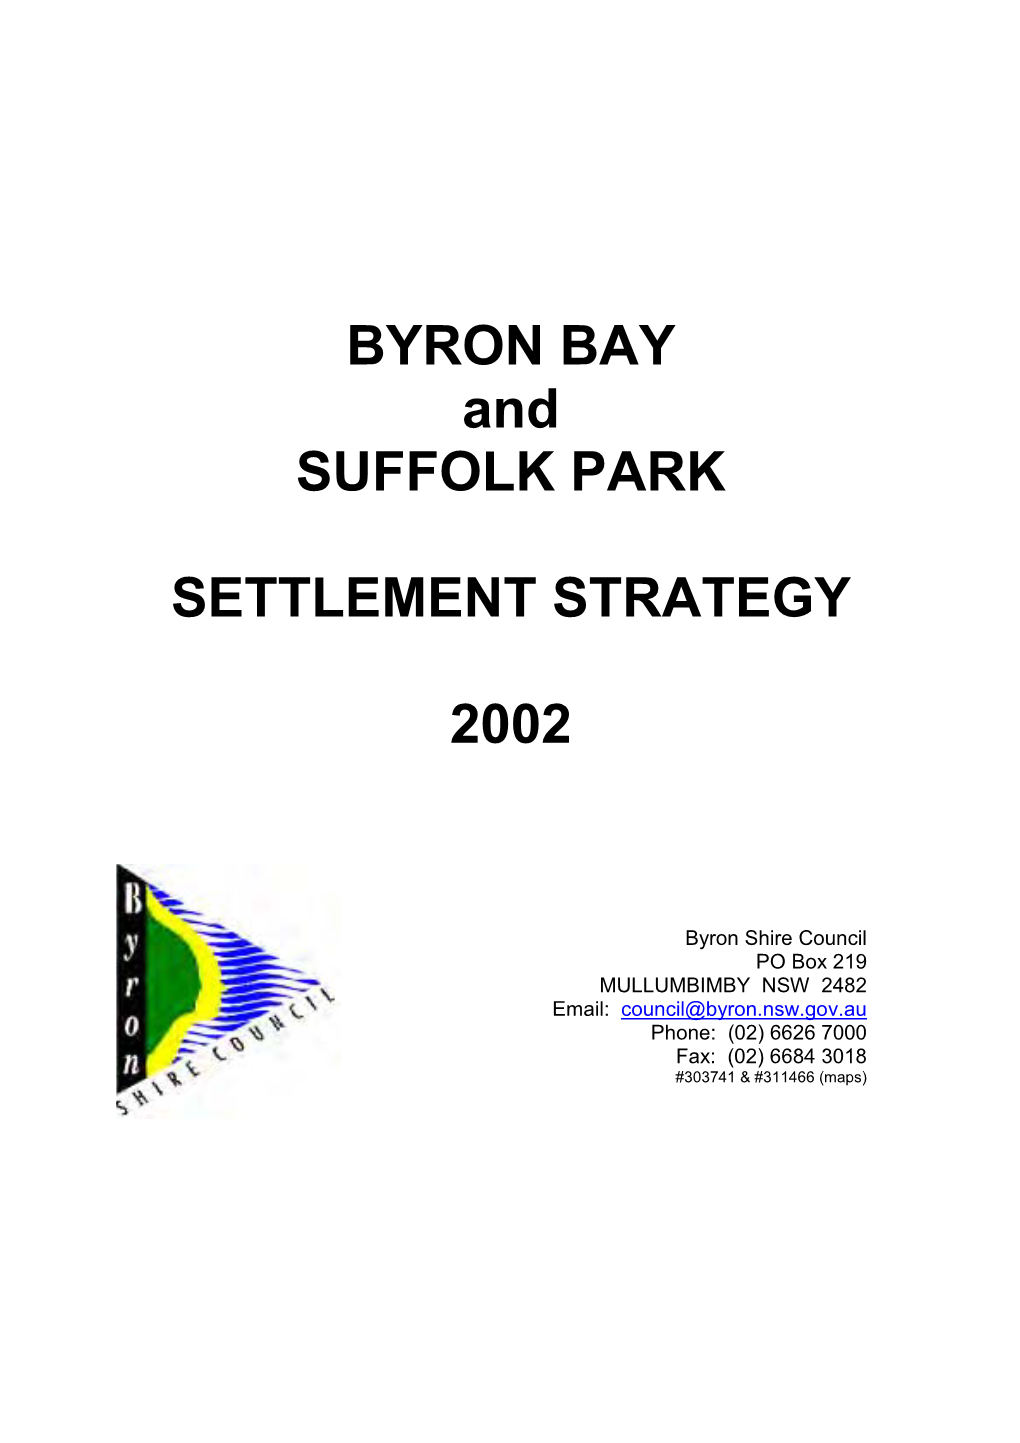 BYRON BAY and SUFFOLK PARK SETTLEMENT STRATEGY 2002